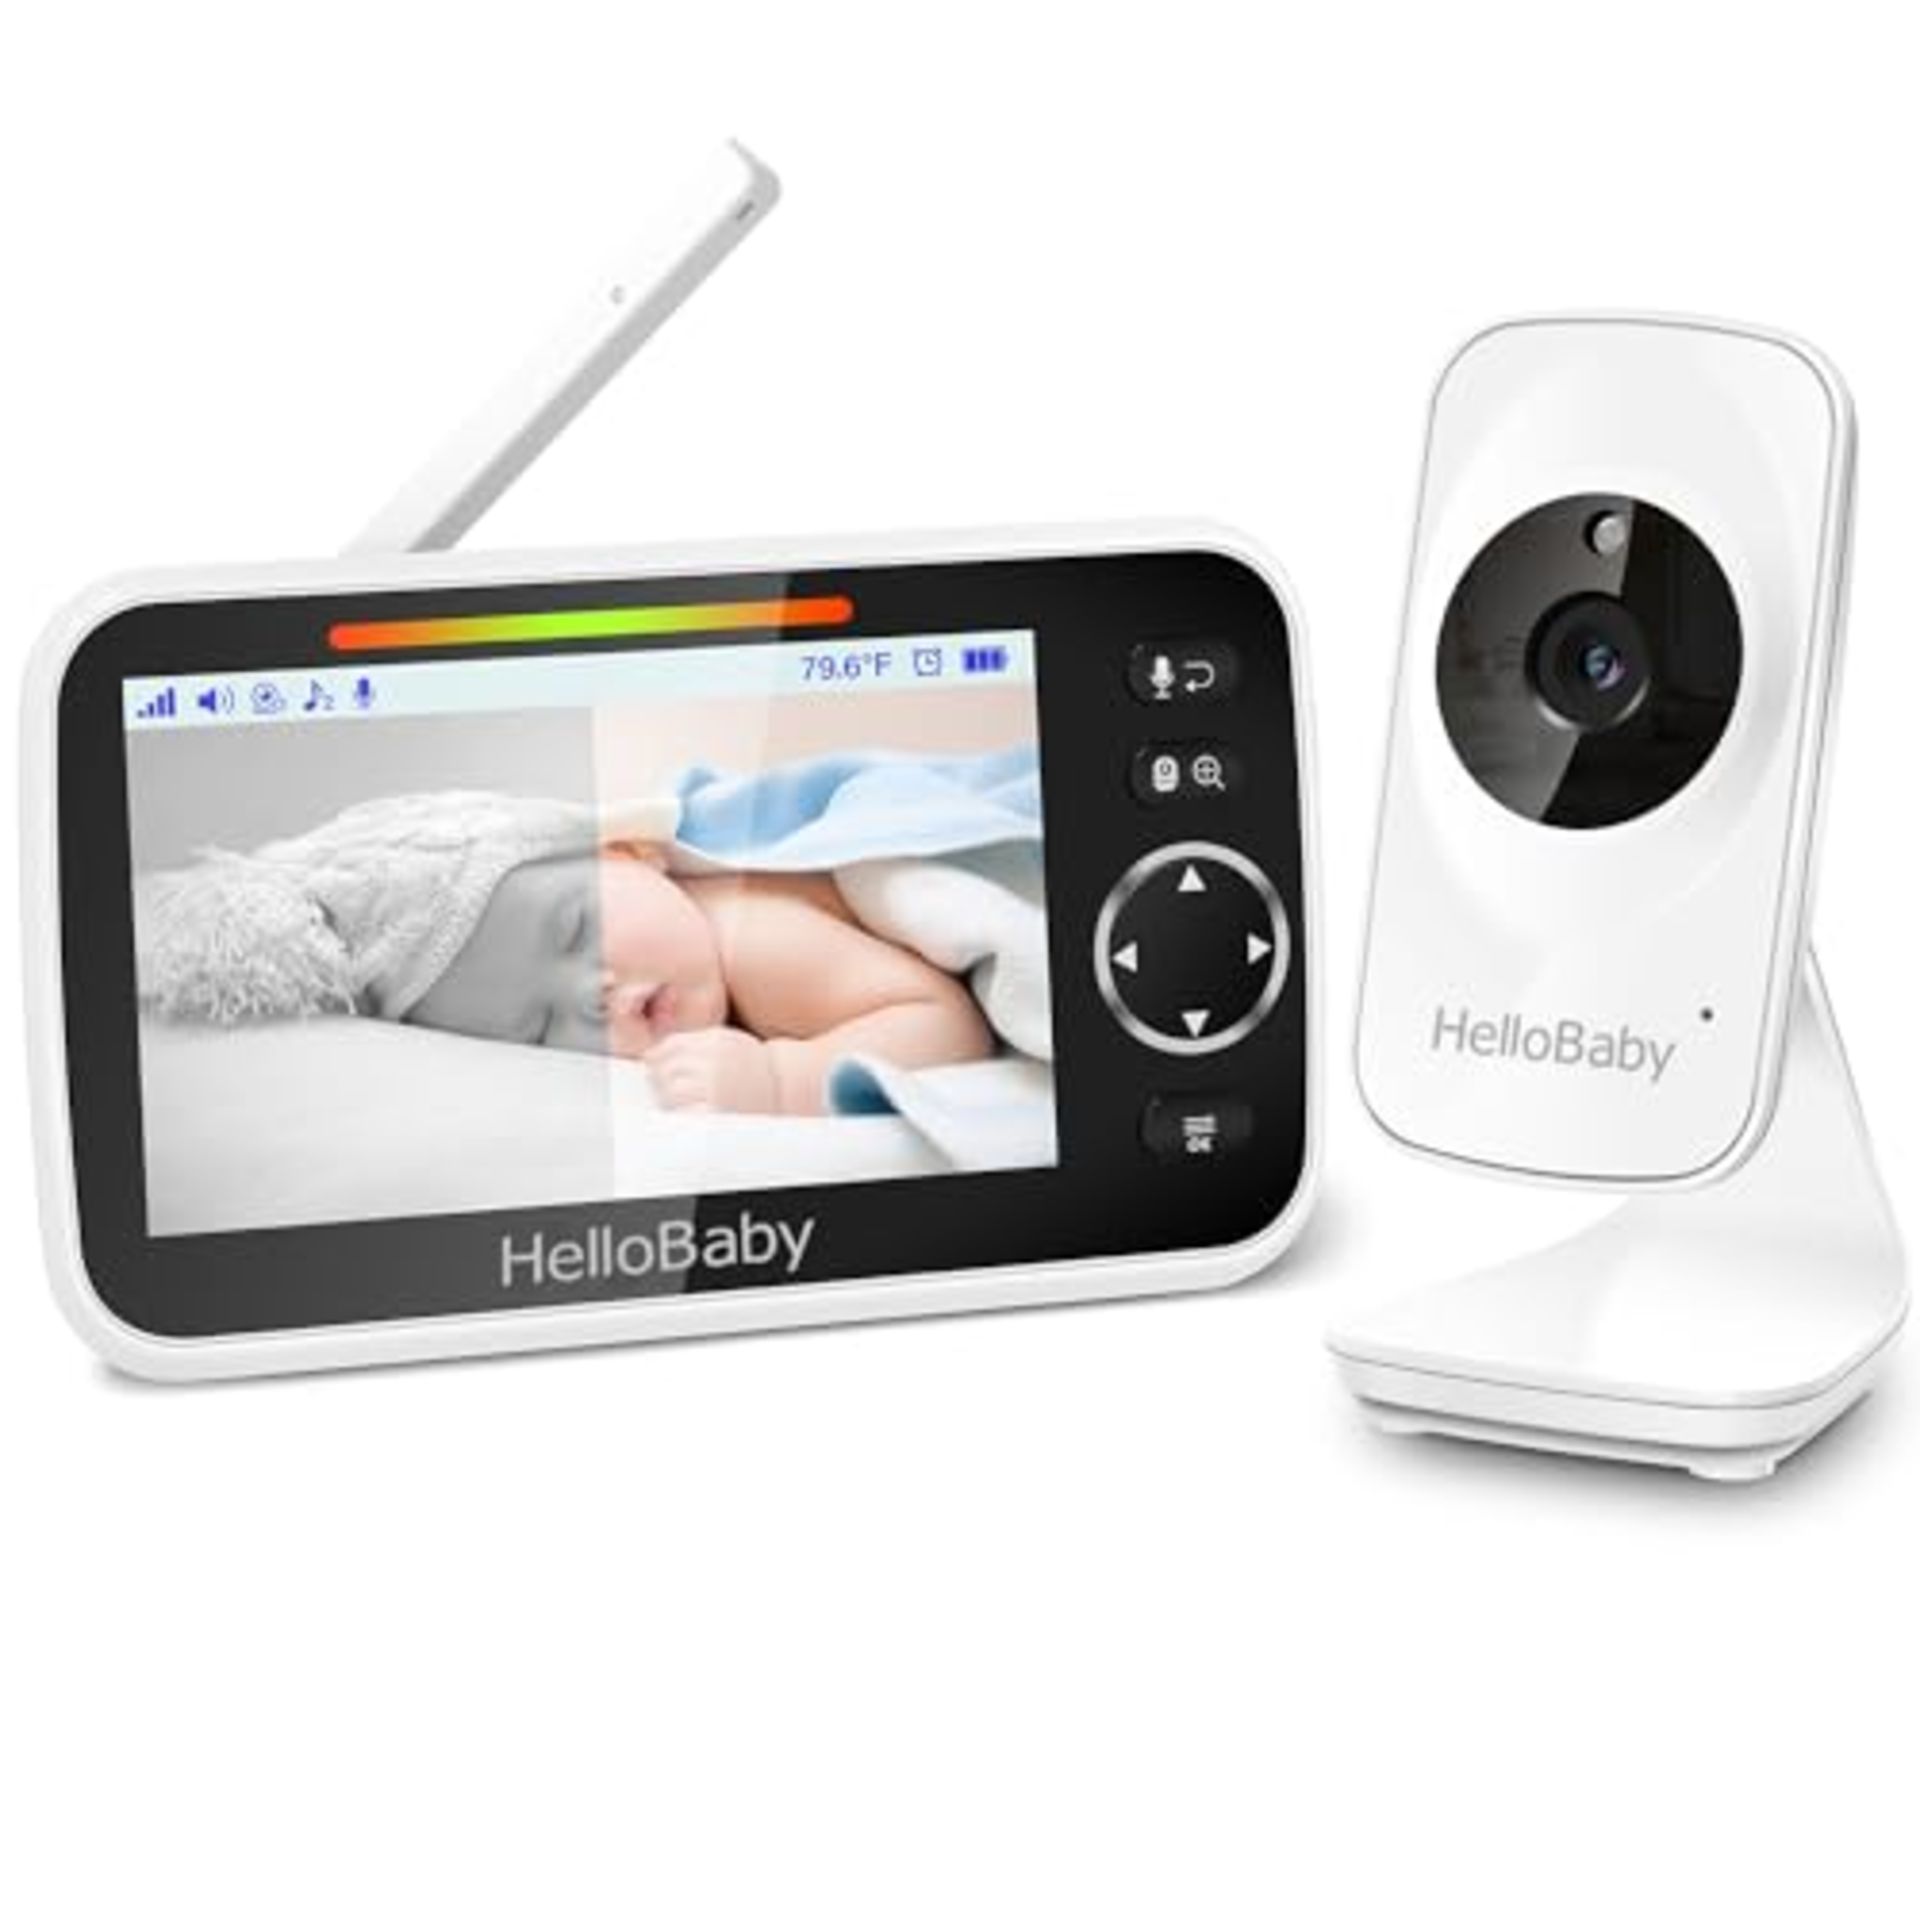 HelloBaby Baby Monitor,30 Hour Battery Life, 5'' Color LCD Screen,Baby Monitor With Camera and Au...